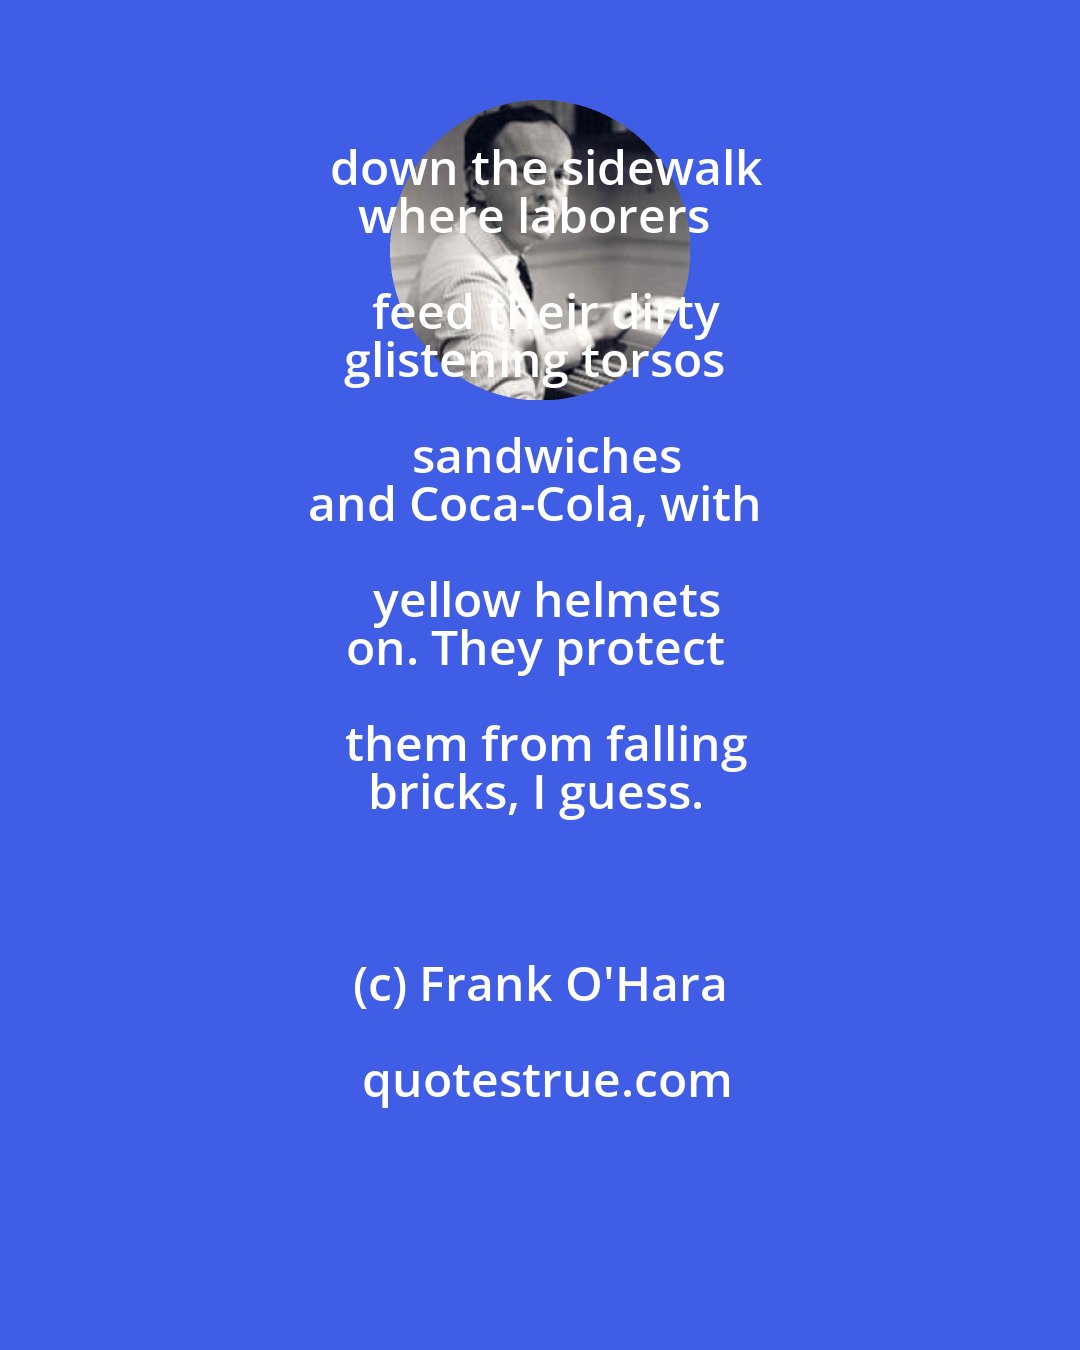 Frank O'Hara: down the sidewalk
where laborers feed their dirty
glistening torsos sandwiches
and Coca-Cola, with yellow helmets
on. They protect them from falling
bricks, I guess.